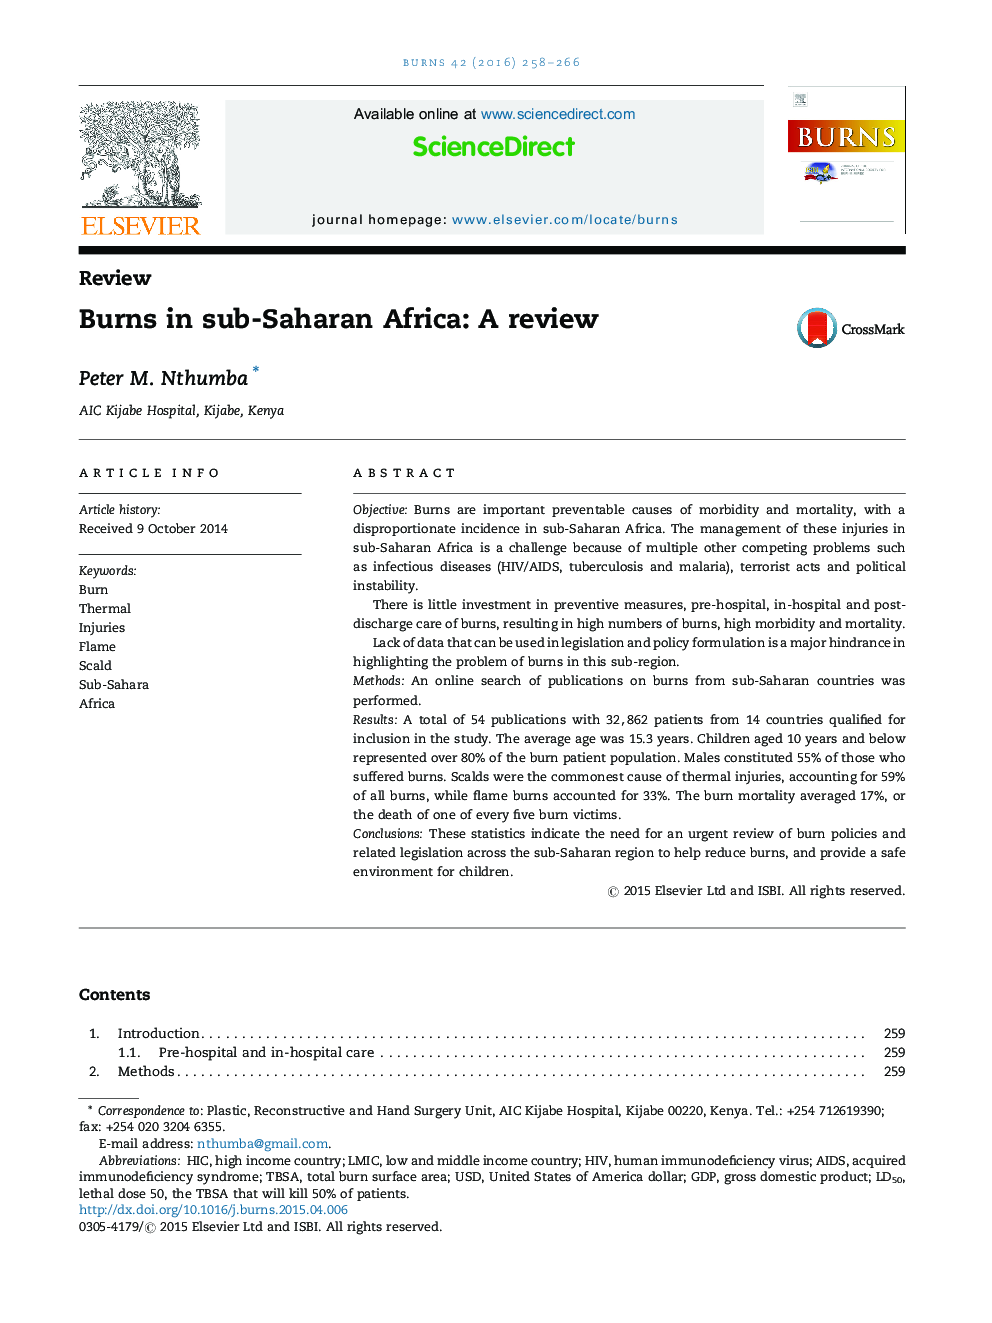 Burns in sub-Saharan Africa: A review